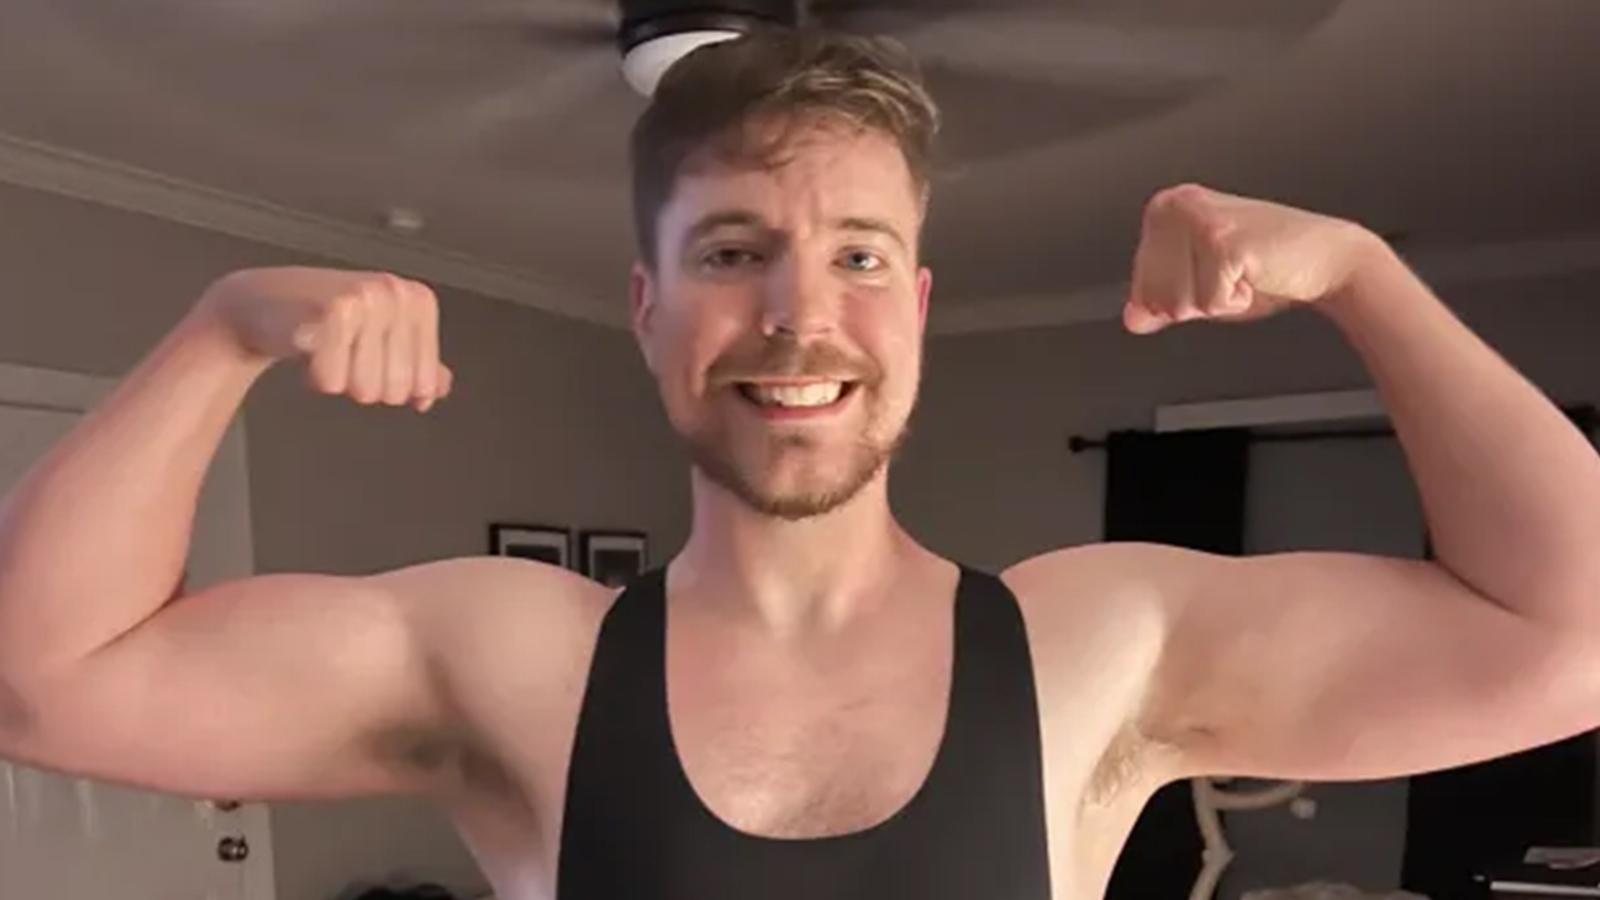 mrbeast-challenges-t-series-ceo-boxing-match